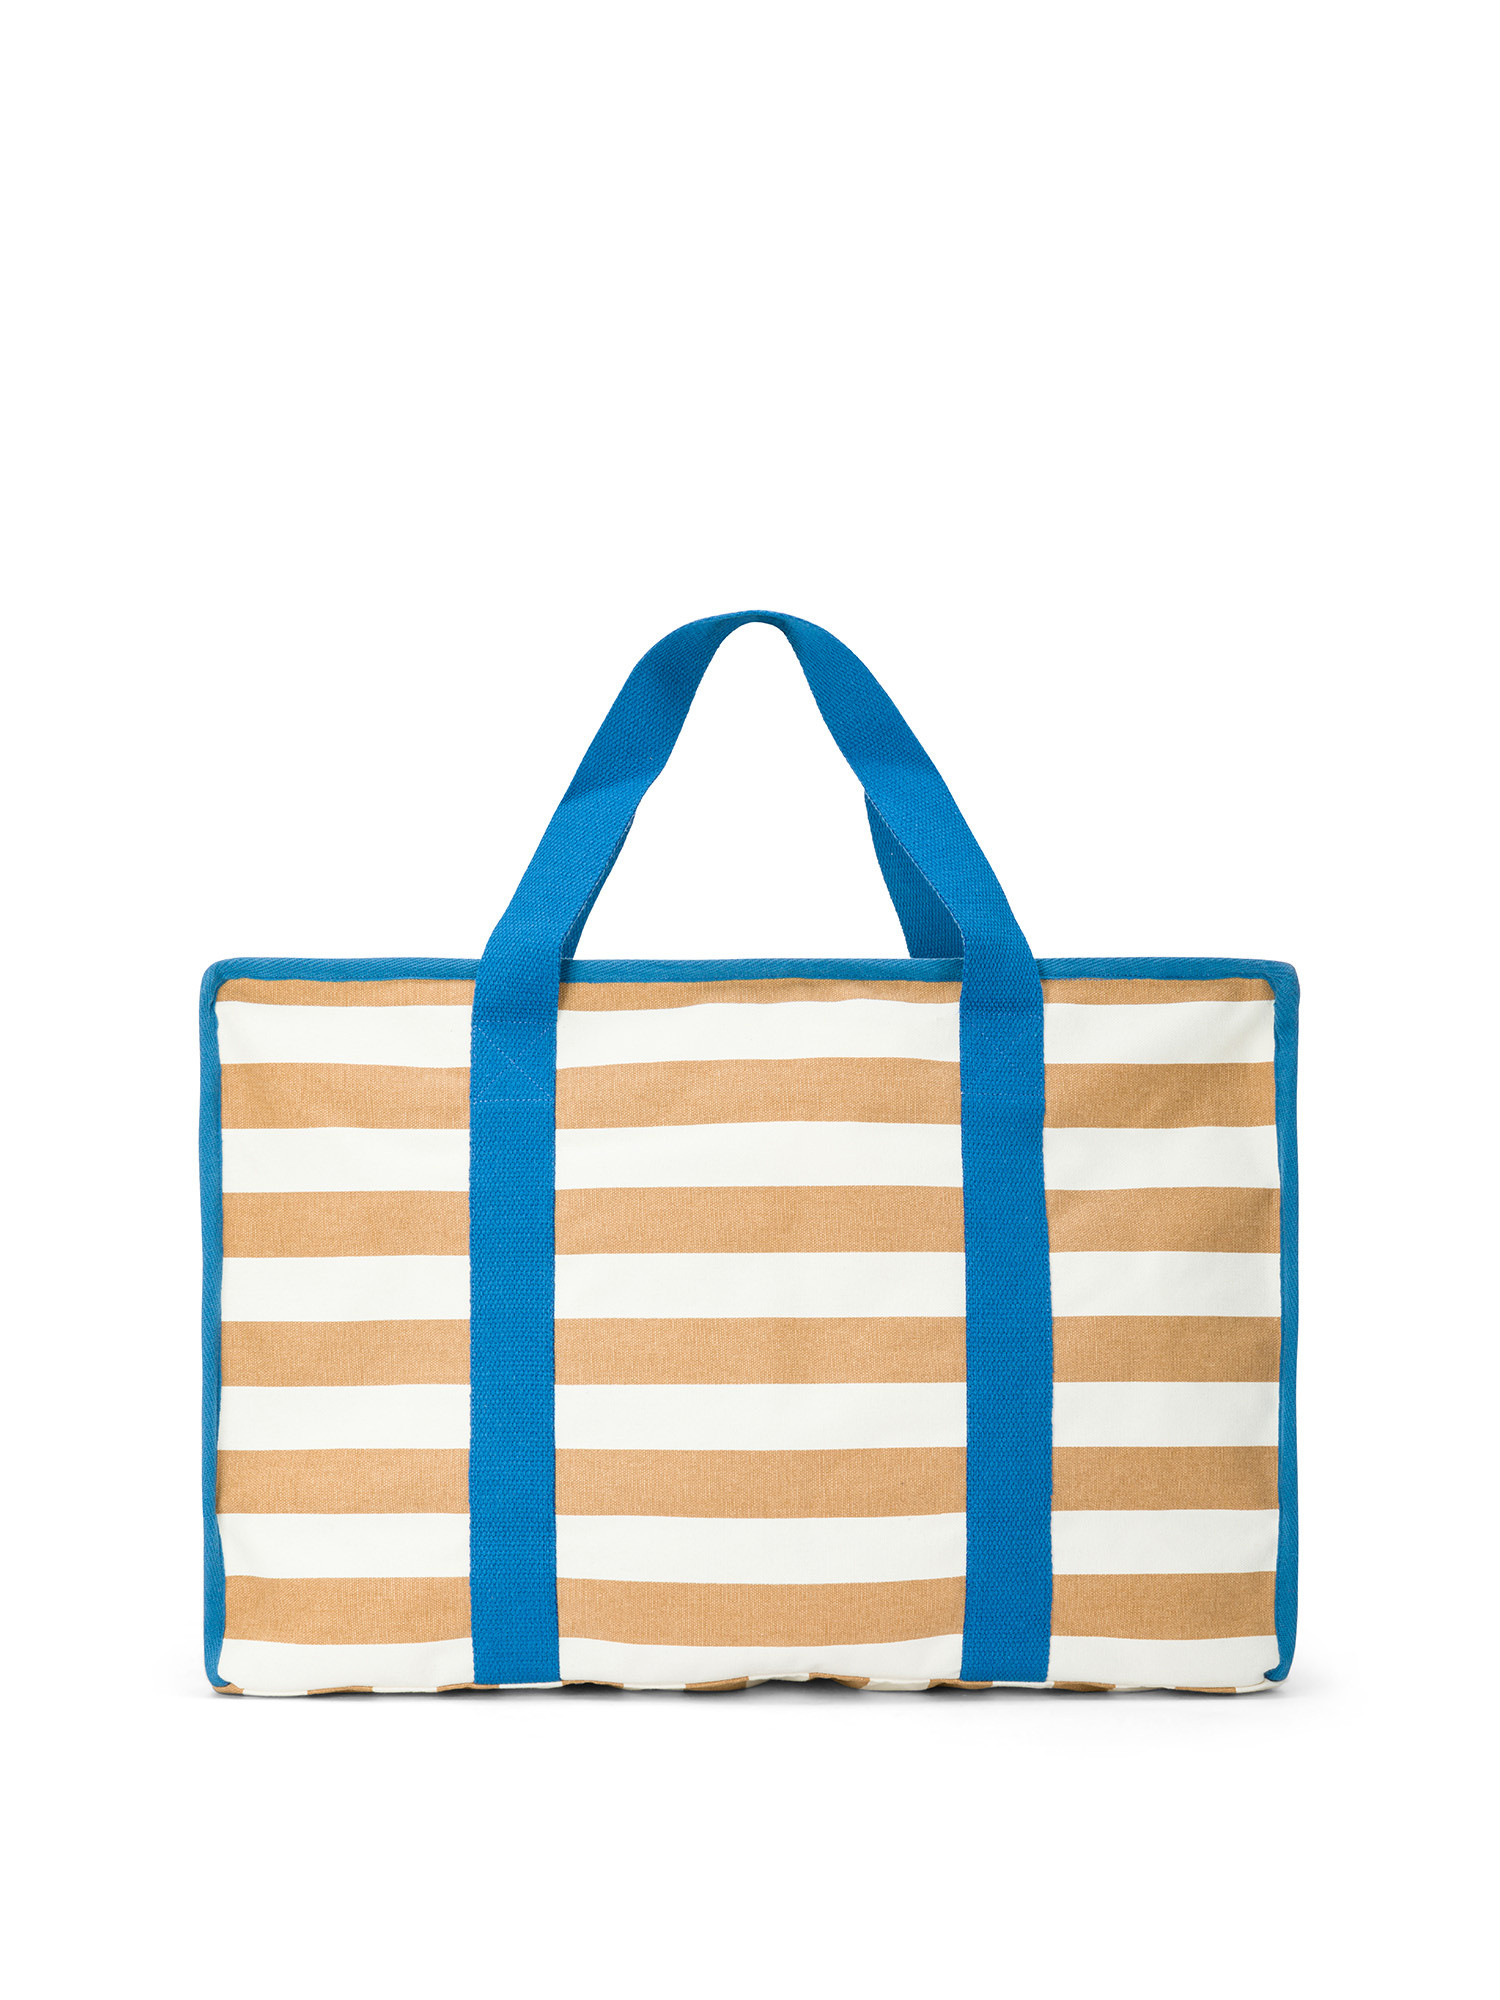 Beach bag with zip closure and side pockets, Multicolor, large image number 0